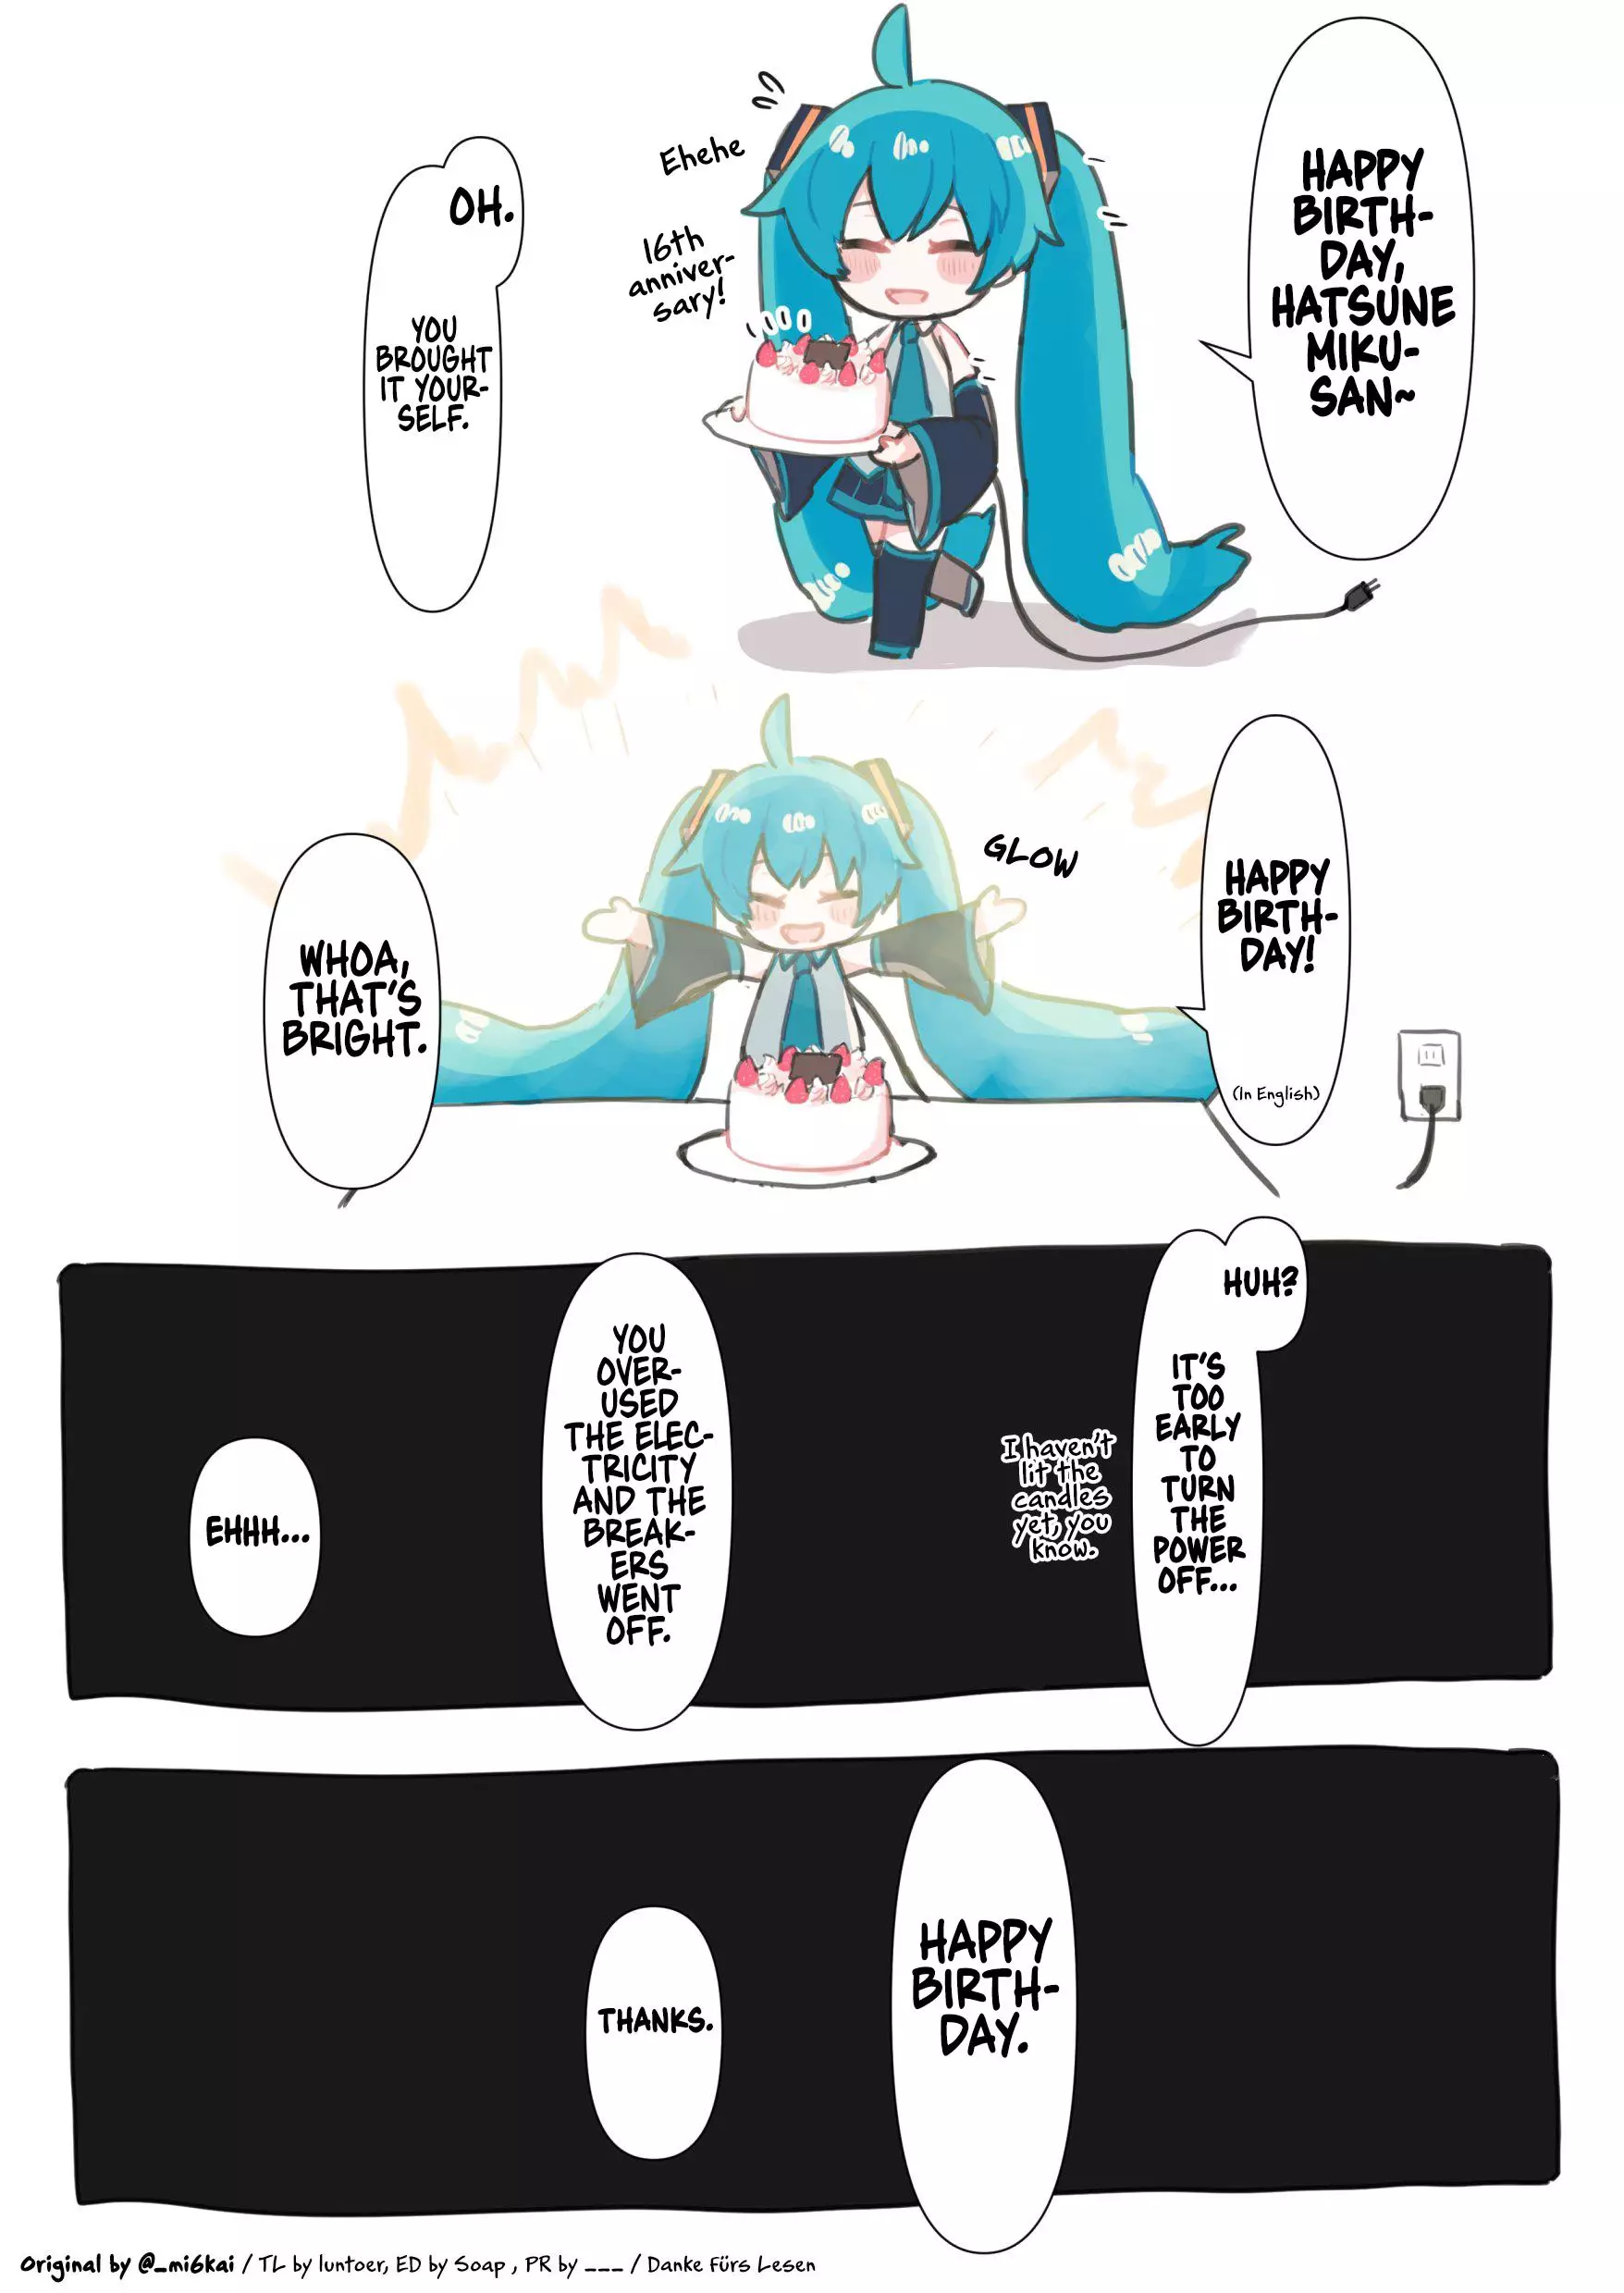 The Daily Life Of Master & Hatsune Miku - 37 page 1-40bf588b